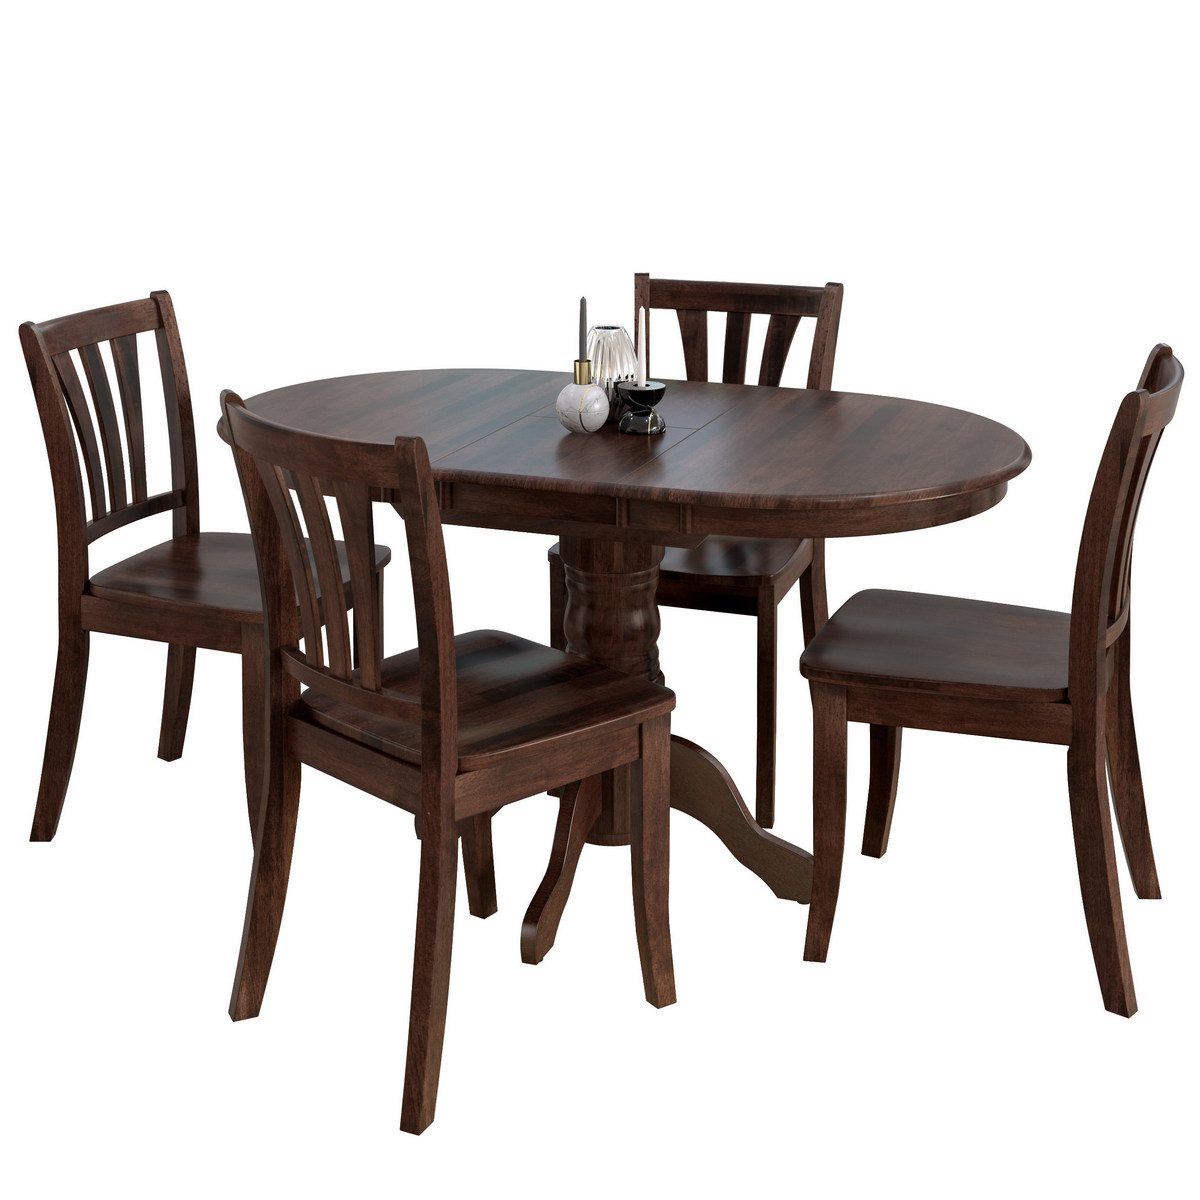 Corliving Furniture Extendable Dining Set